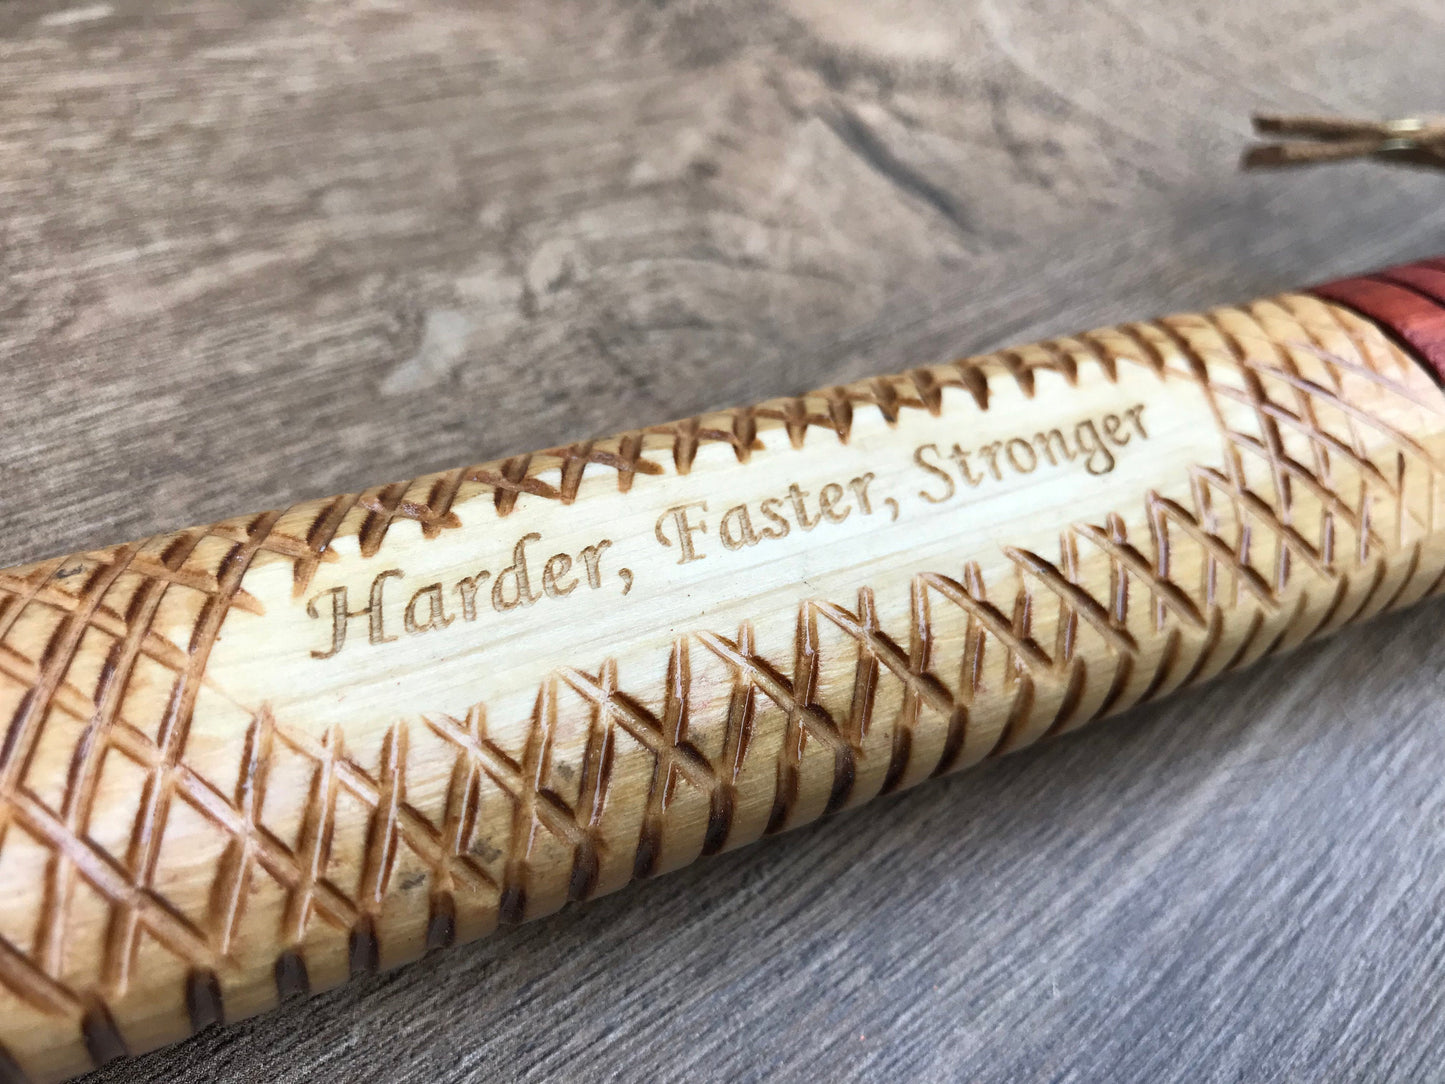 Hammer, personalized hammer, customized hammer, fathers day gift, gift for Dad, handyman tool, handyman gift, iron anniversary gift, tools